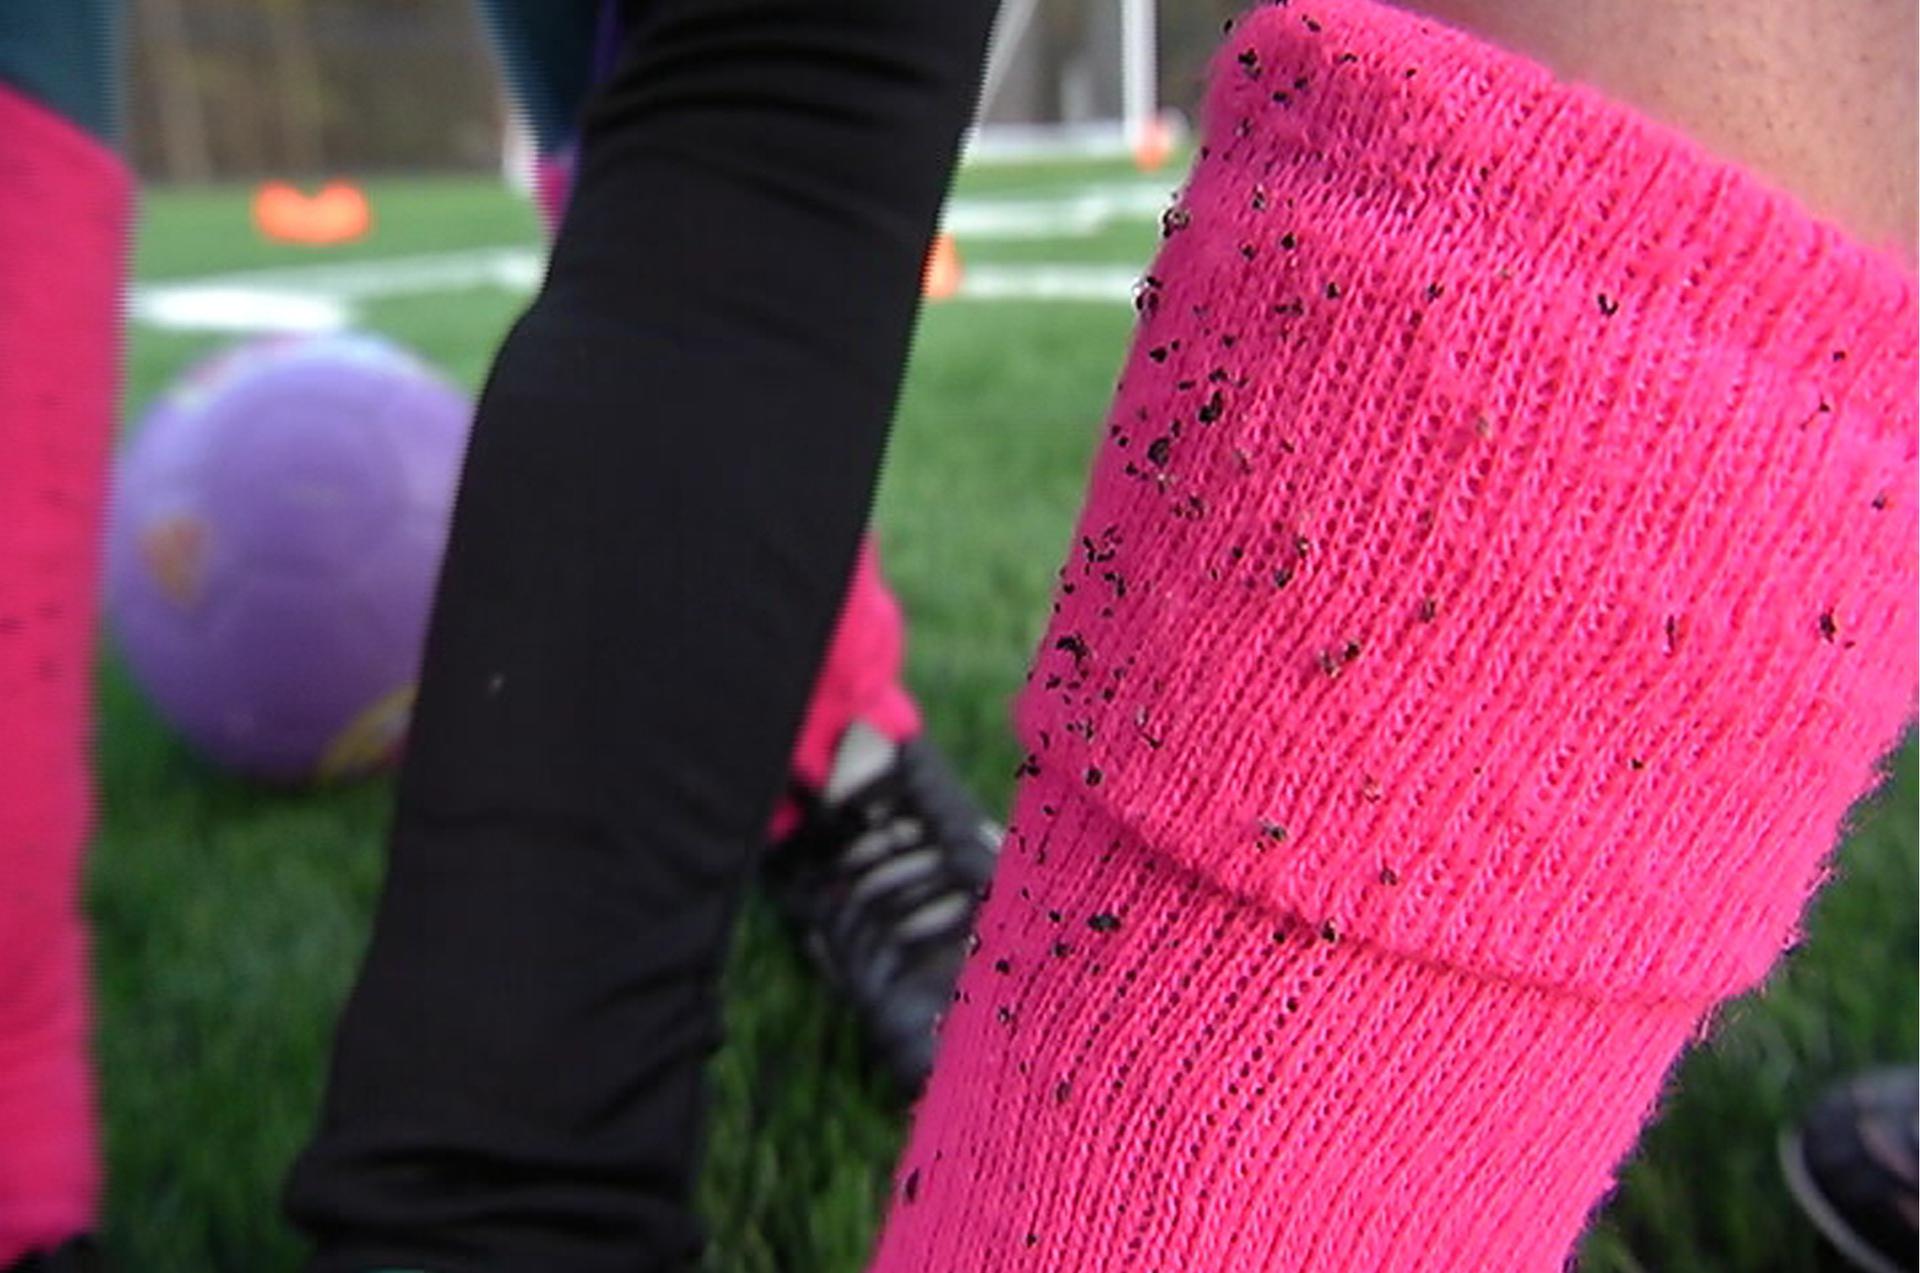 A Medway youth soccer player's sock collects particles of crumb rubber from the Medway High School synthetic turf field. The ant-size pellets act as artificial dirt for the artificial grass and they become ubiquitous in the lives of families whose kids pl